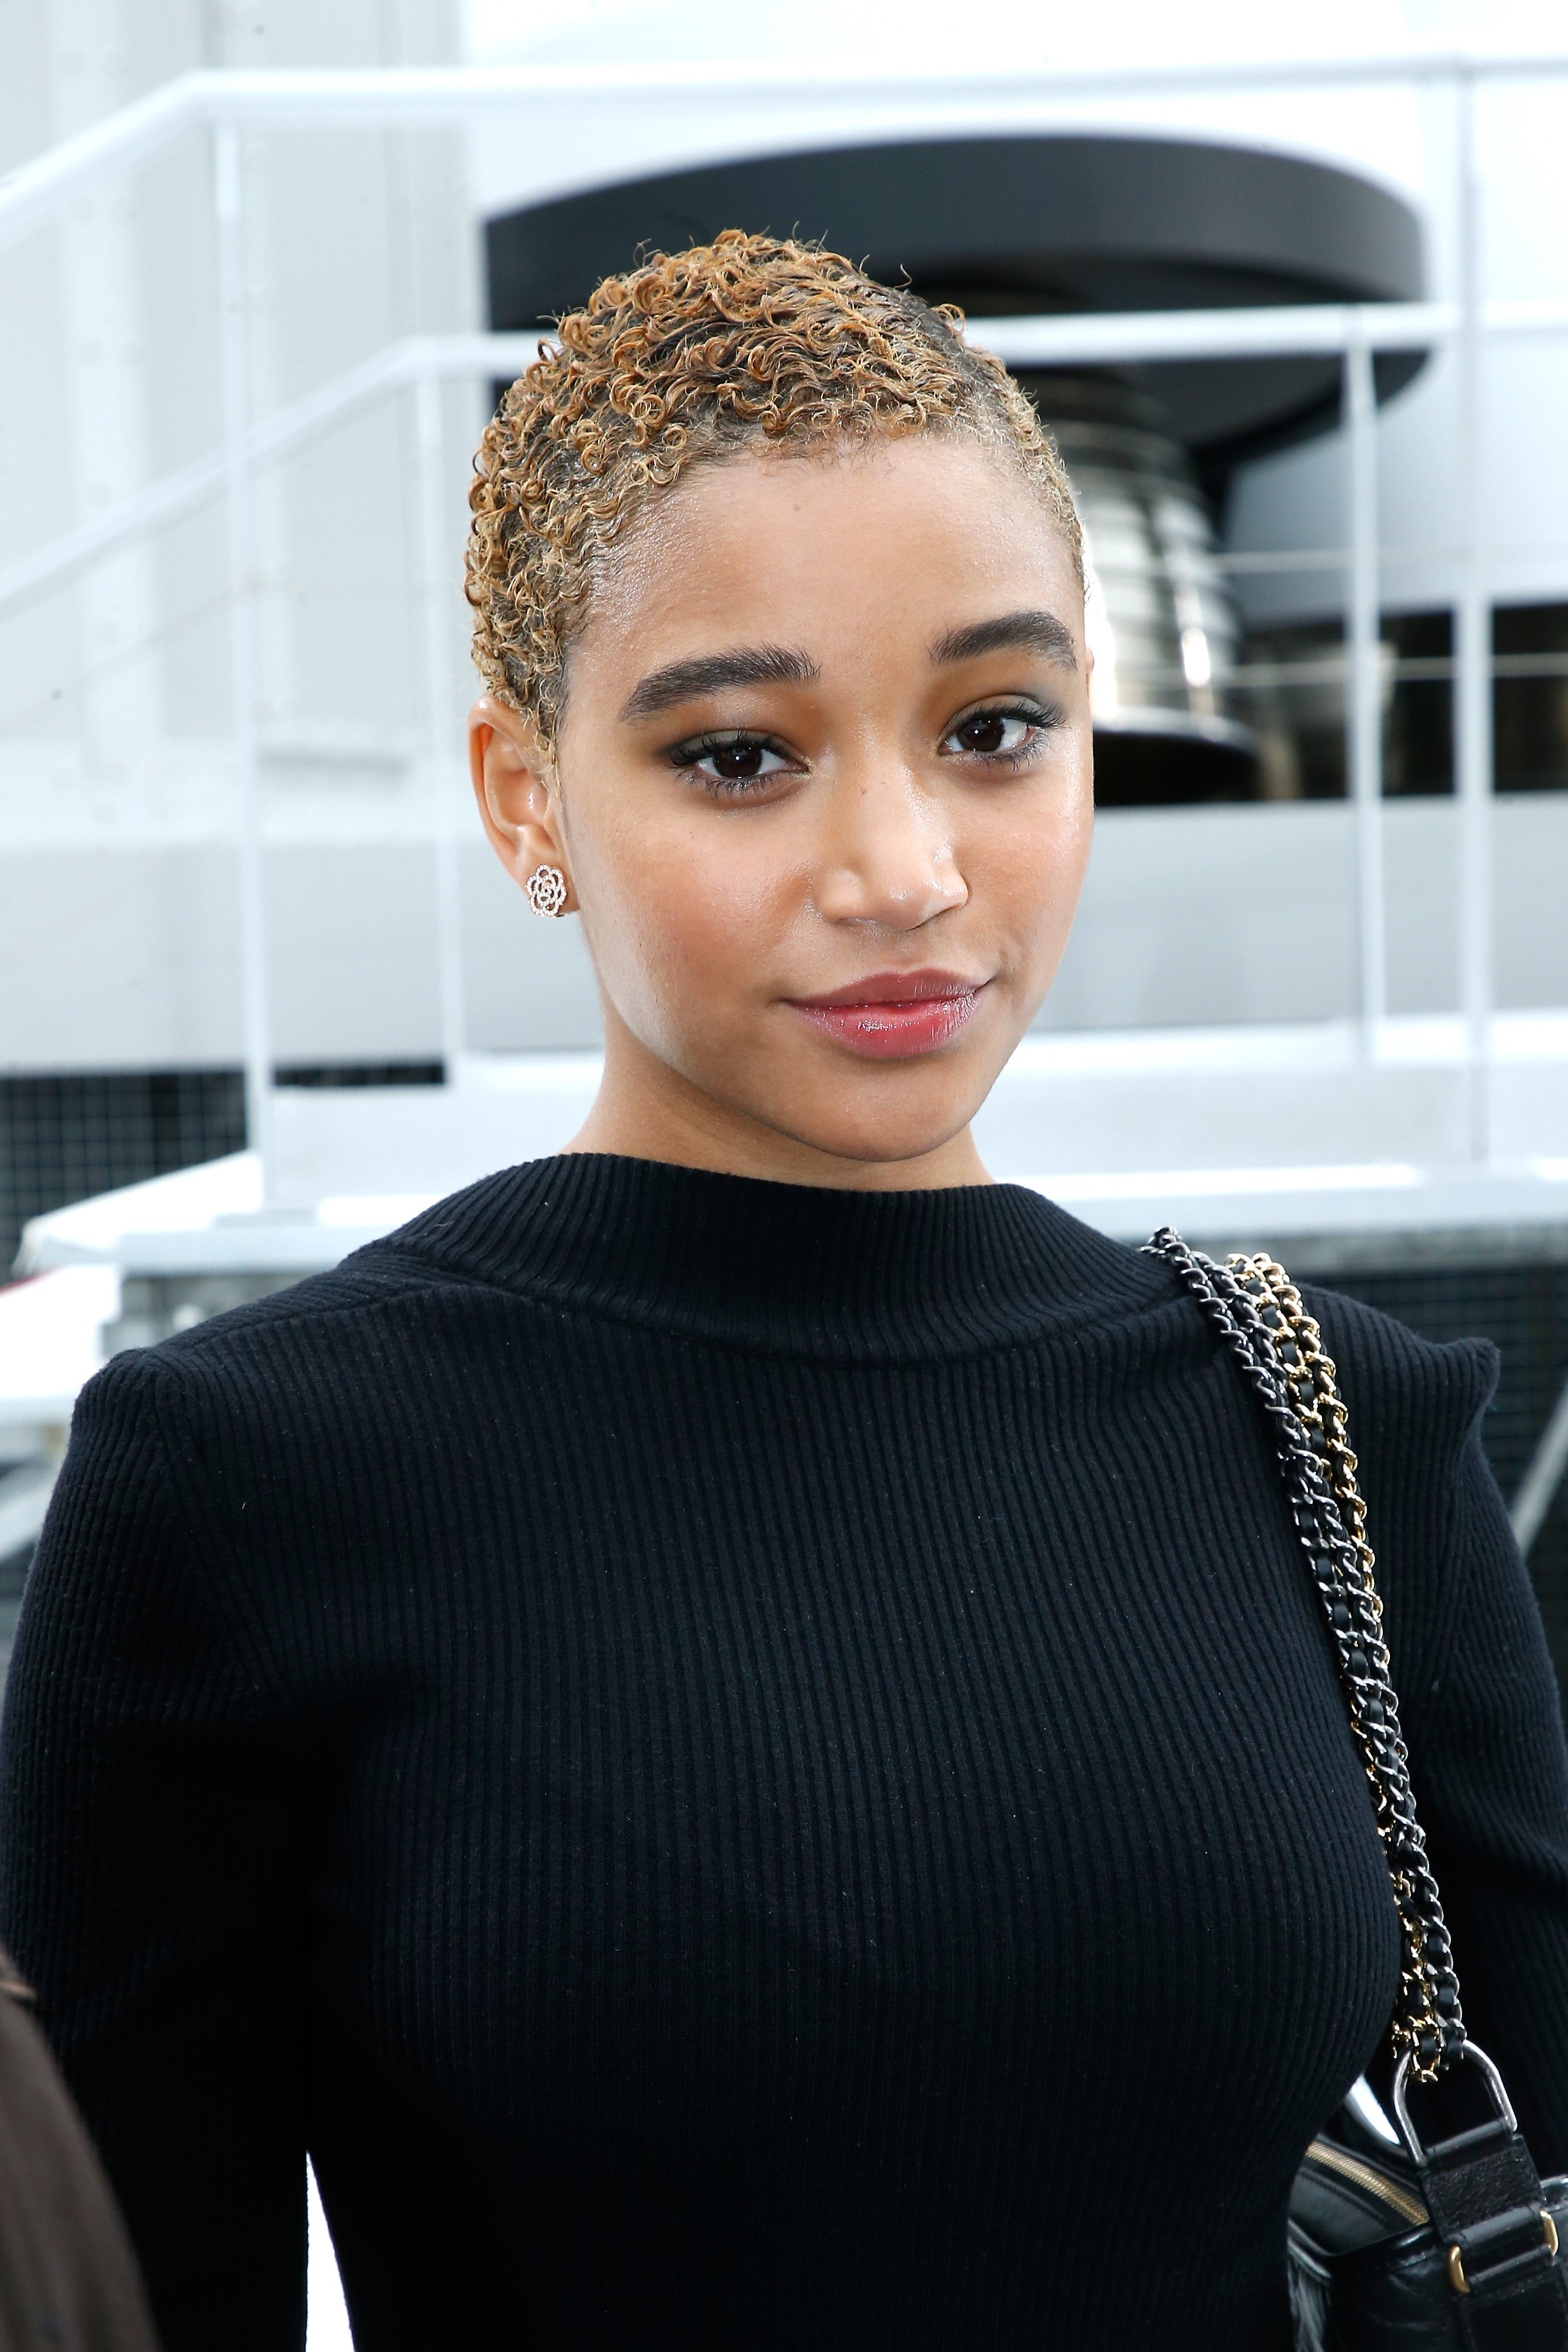 Amandla Stenberg Goes Back to a Buzz Cut and It's Perfection
